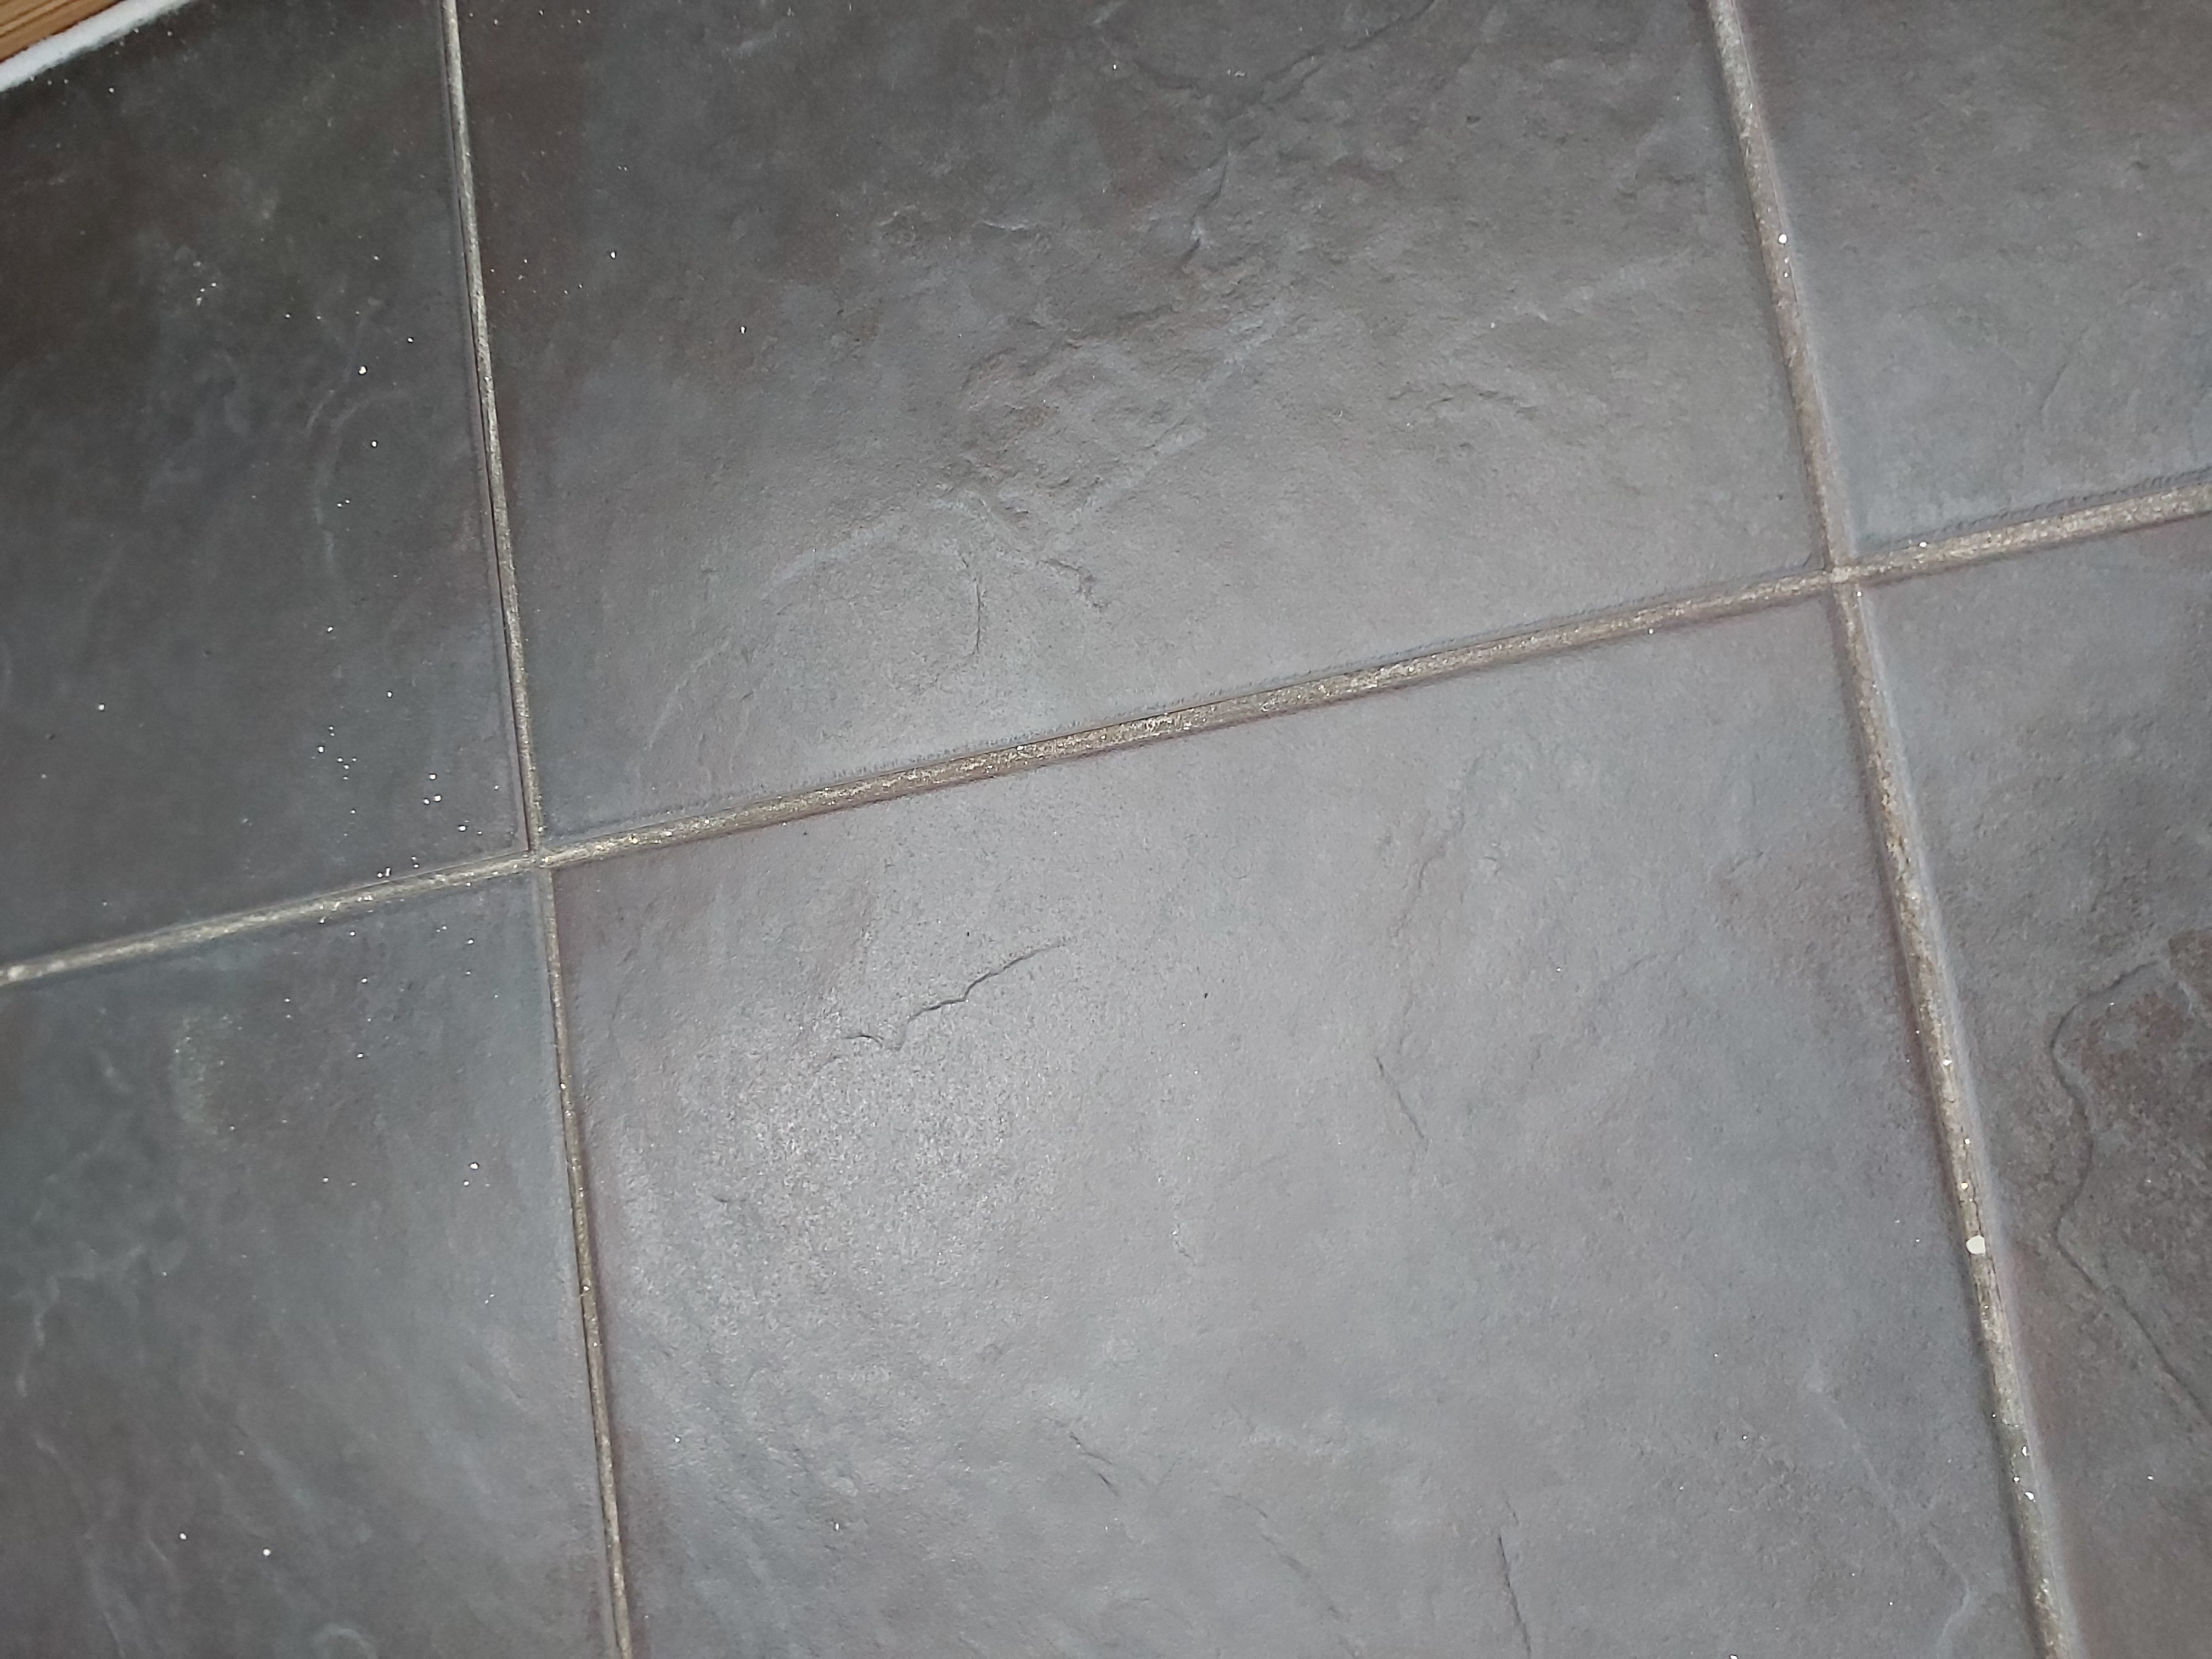 Close up image of grey floor tiles, spotted with white paint